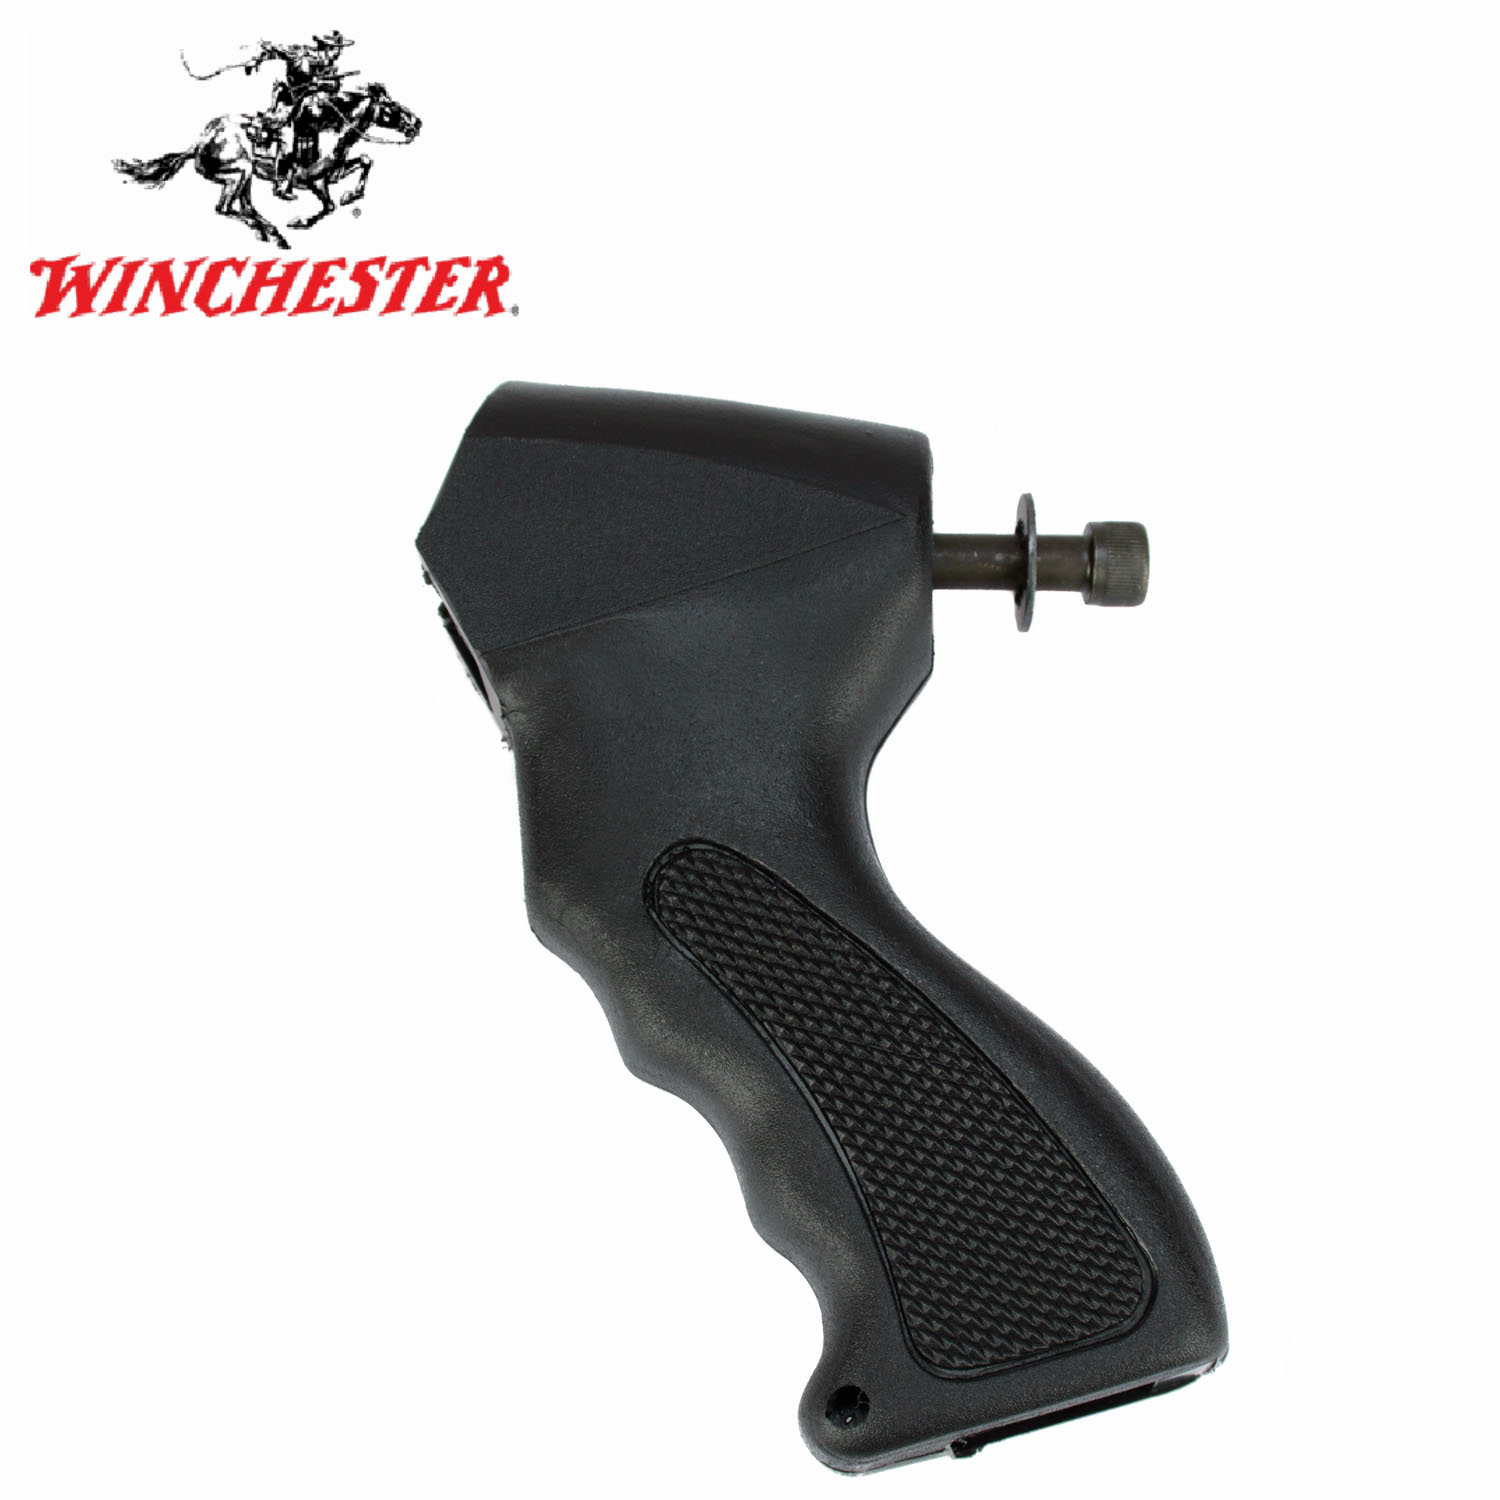 Winchester 1200 / 1300/ 1400 / 1500 Pistol Grip Assembly.